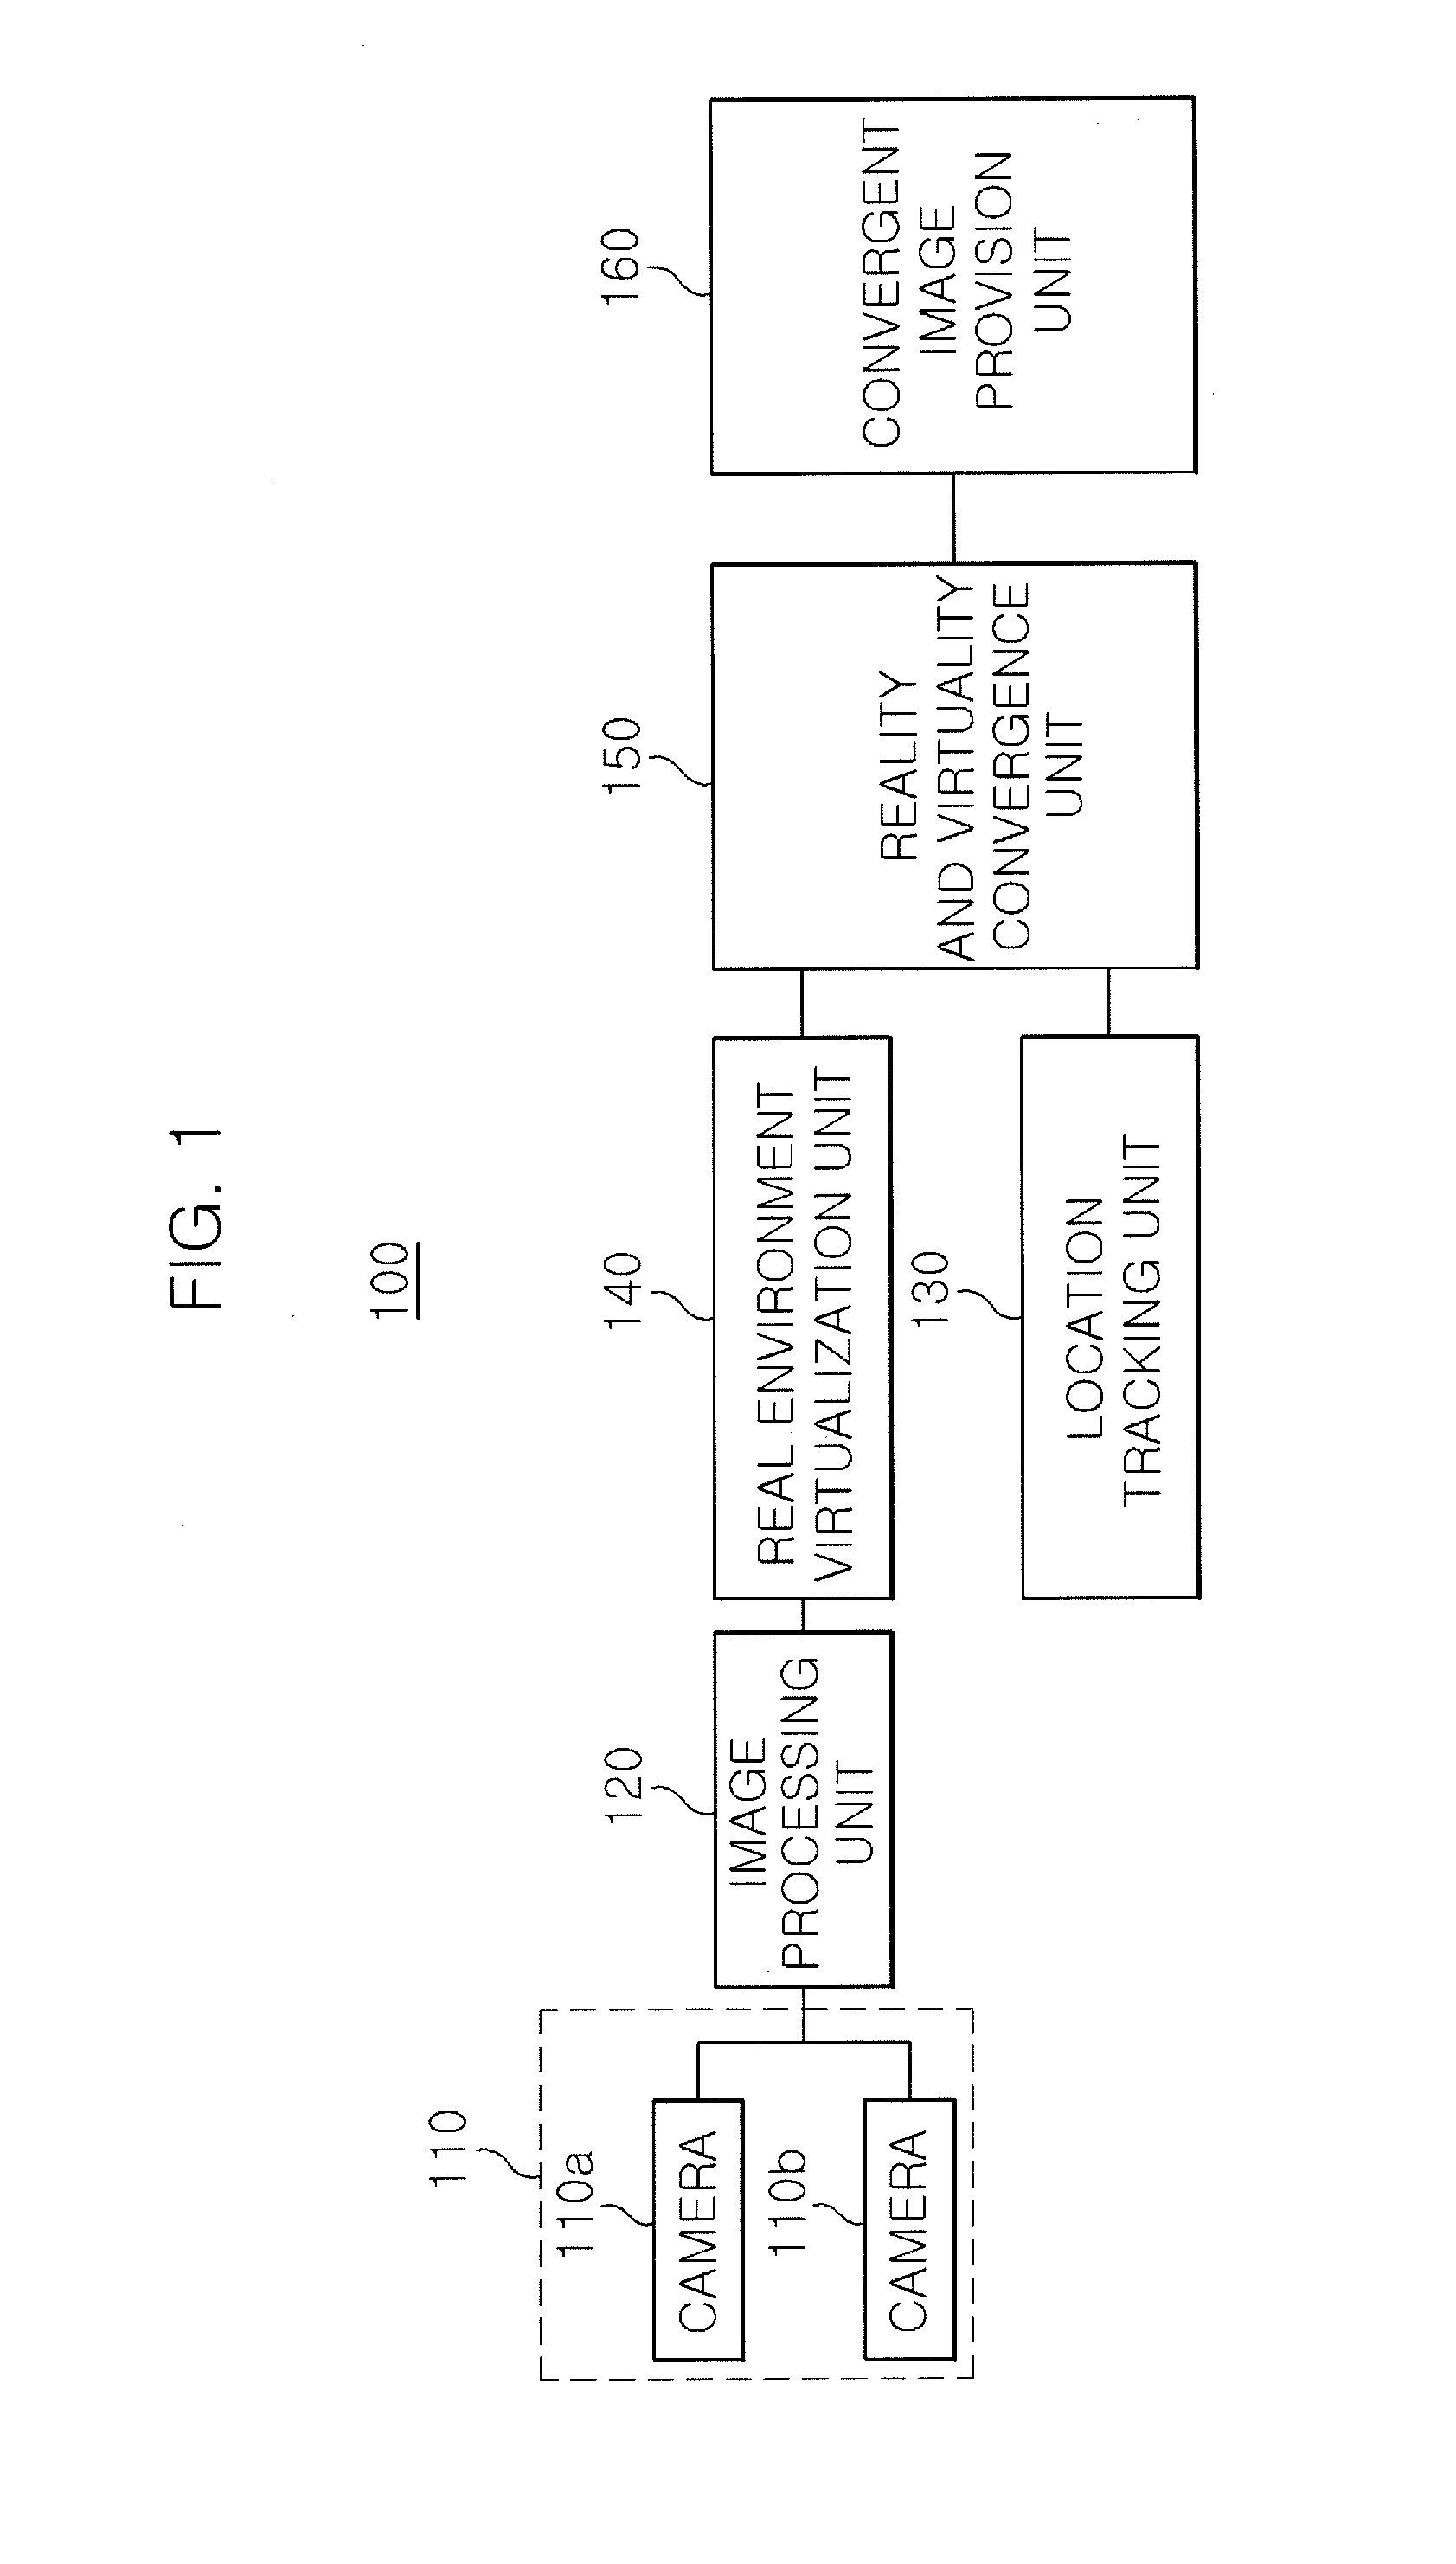 Apparatus and method for converging reality and virtuality in a mobile environment